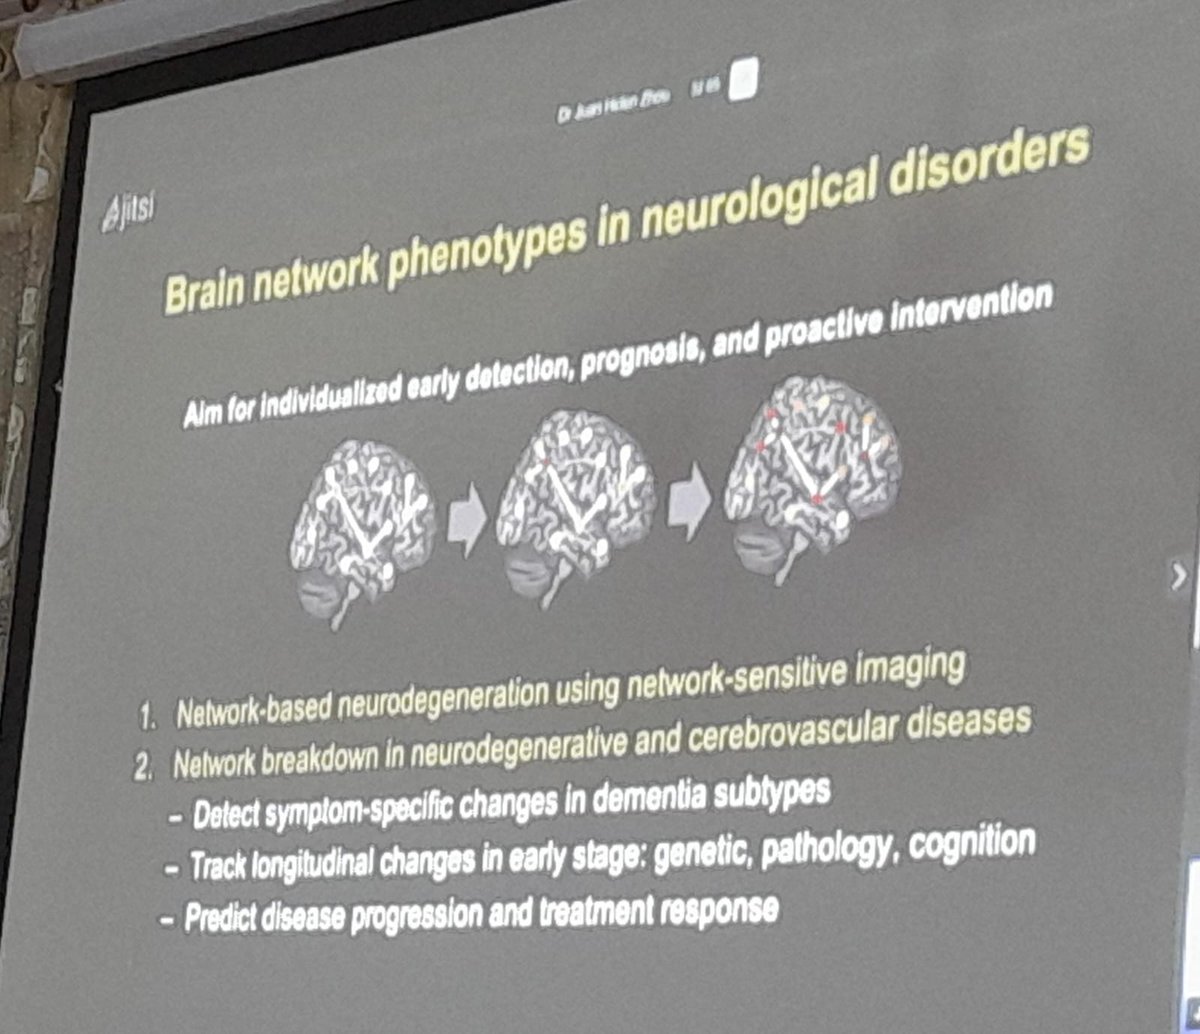 Developing personalized early detection for Alzheimer's Disease & other neurodegenerative diseases using brain imaging to identify changes in neural networks. Higher free water associated w/ longitudinal cognitive decline. @HelenJuanZhou @NUSingapore in @IBROorg Nepal School